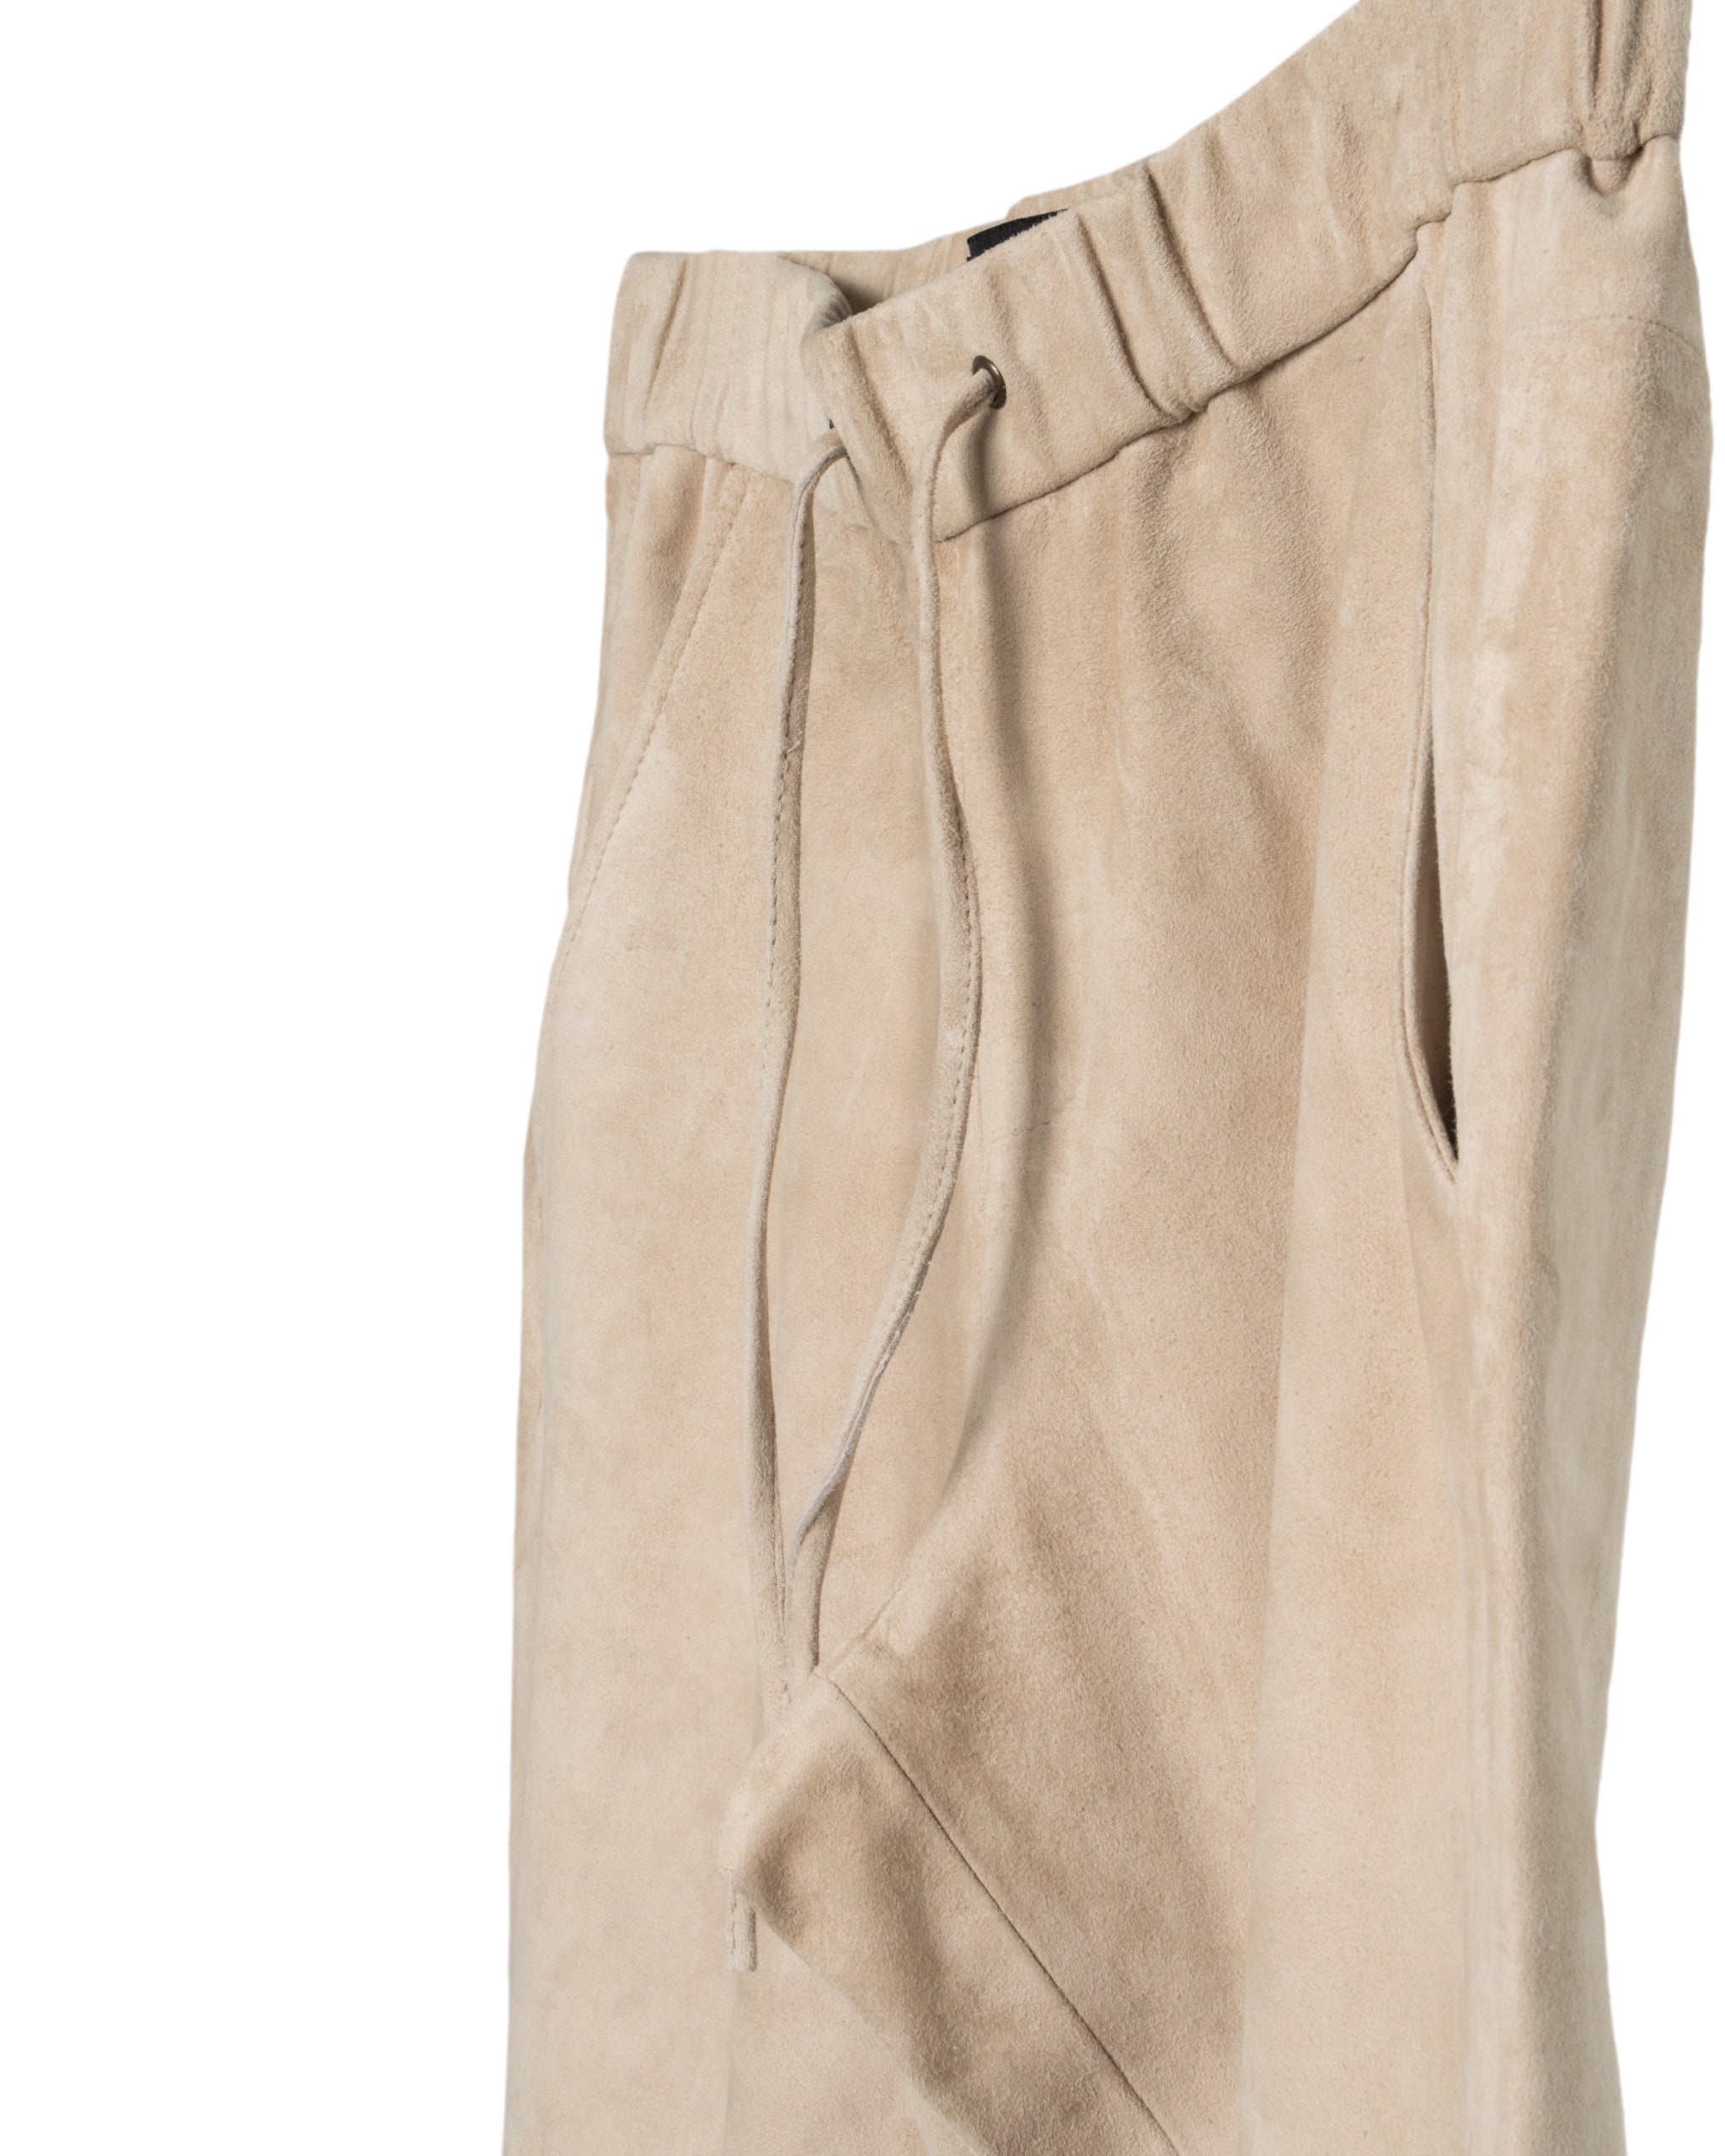 SUEDE STRETCH LEATHER JOGG PANTS